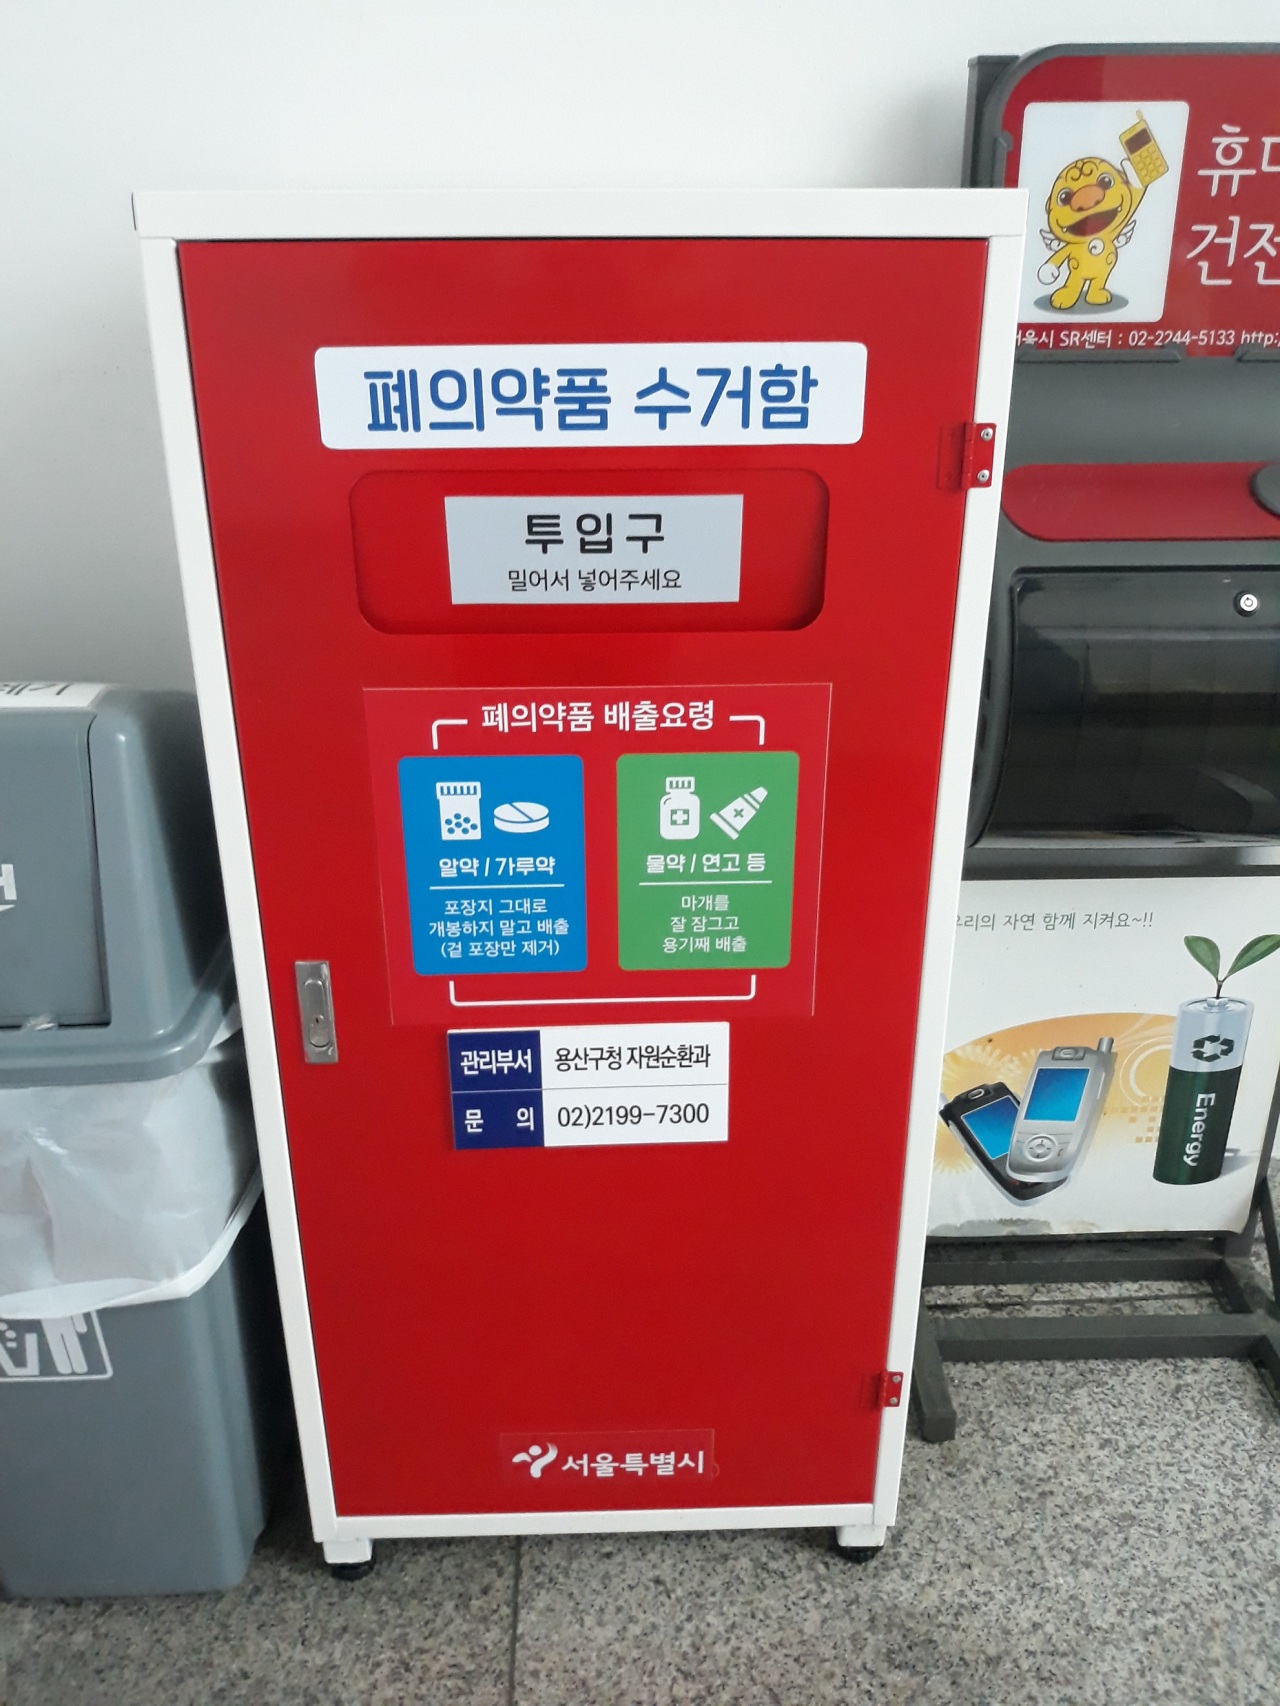 A designated drop-off box at a community center in Yongsan-gu, central Seoul. (Hwang Dong-hee / The Korea Herald)